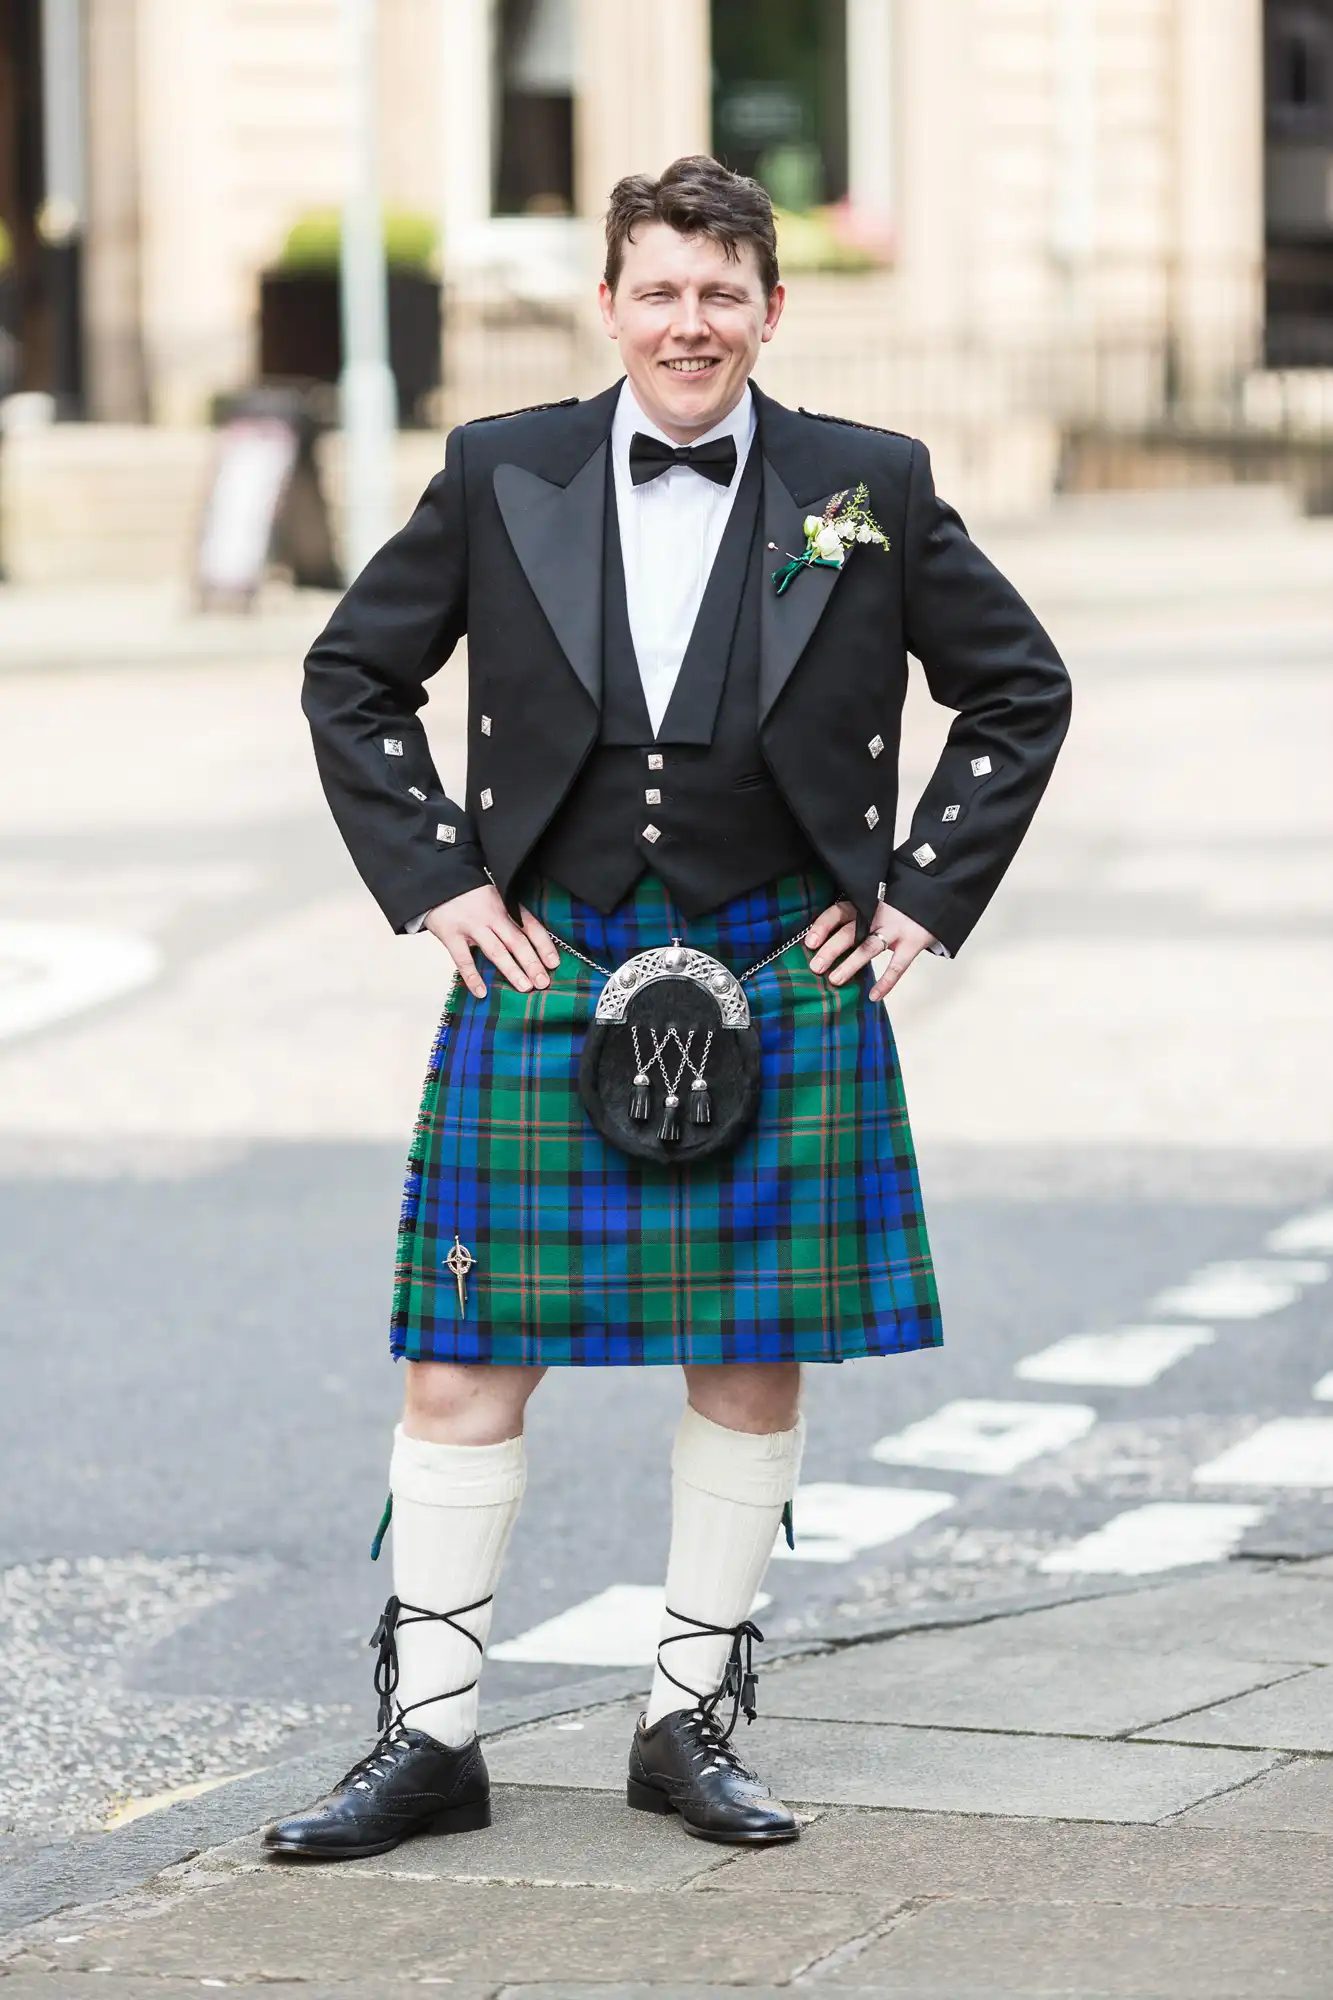 Man in traditional scottish attire including a kilt, black jacket, and sporran, smiling on a city street.